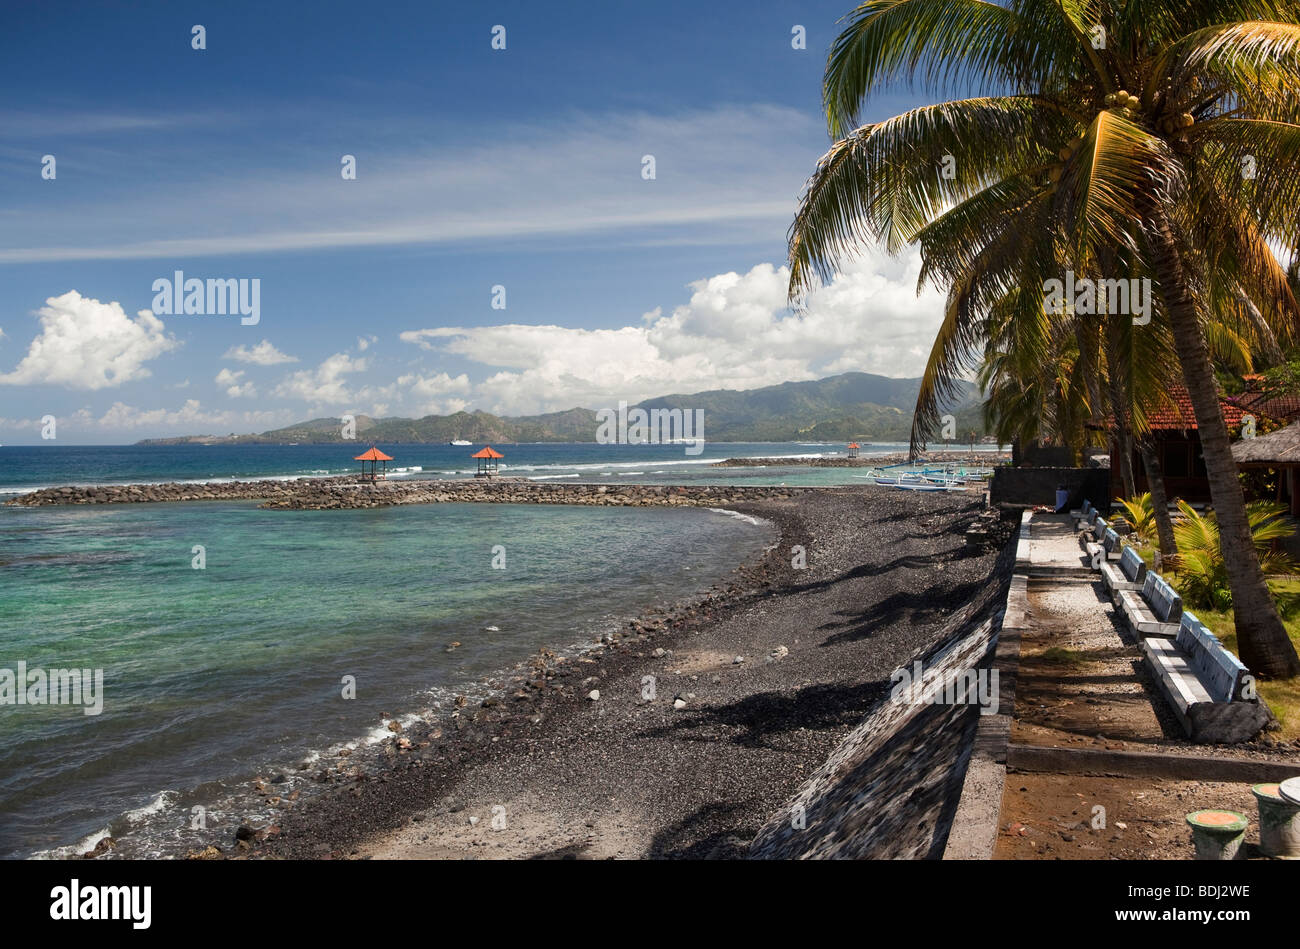 Indonesia, Bali, Candidasa, artificial breakwaters built to protect the beach remains Stock Photo